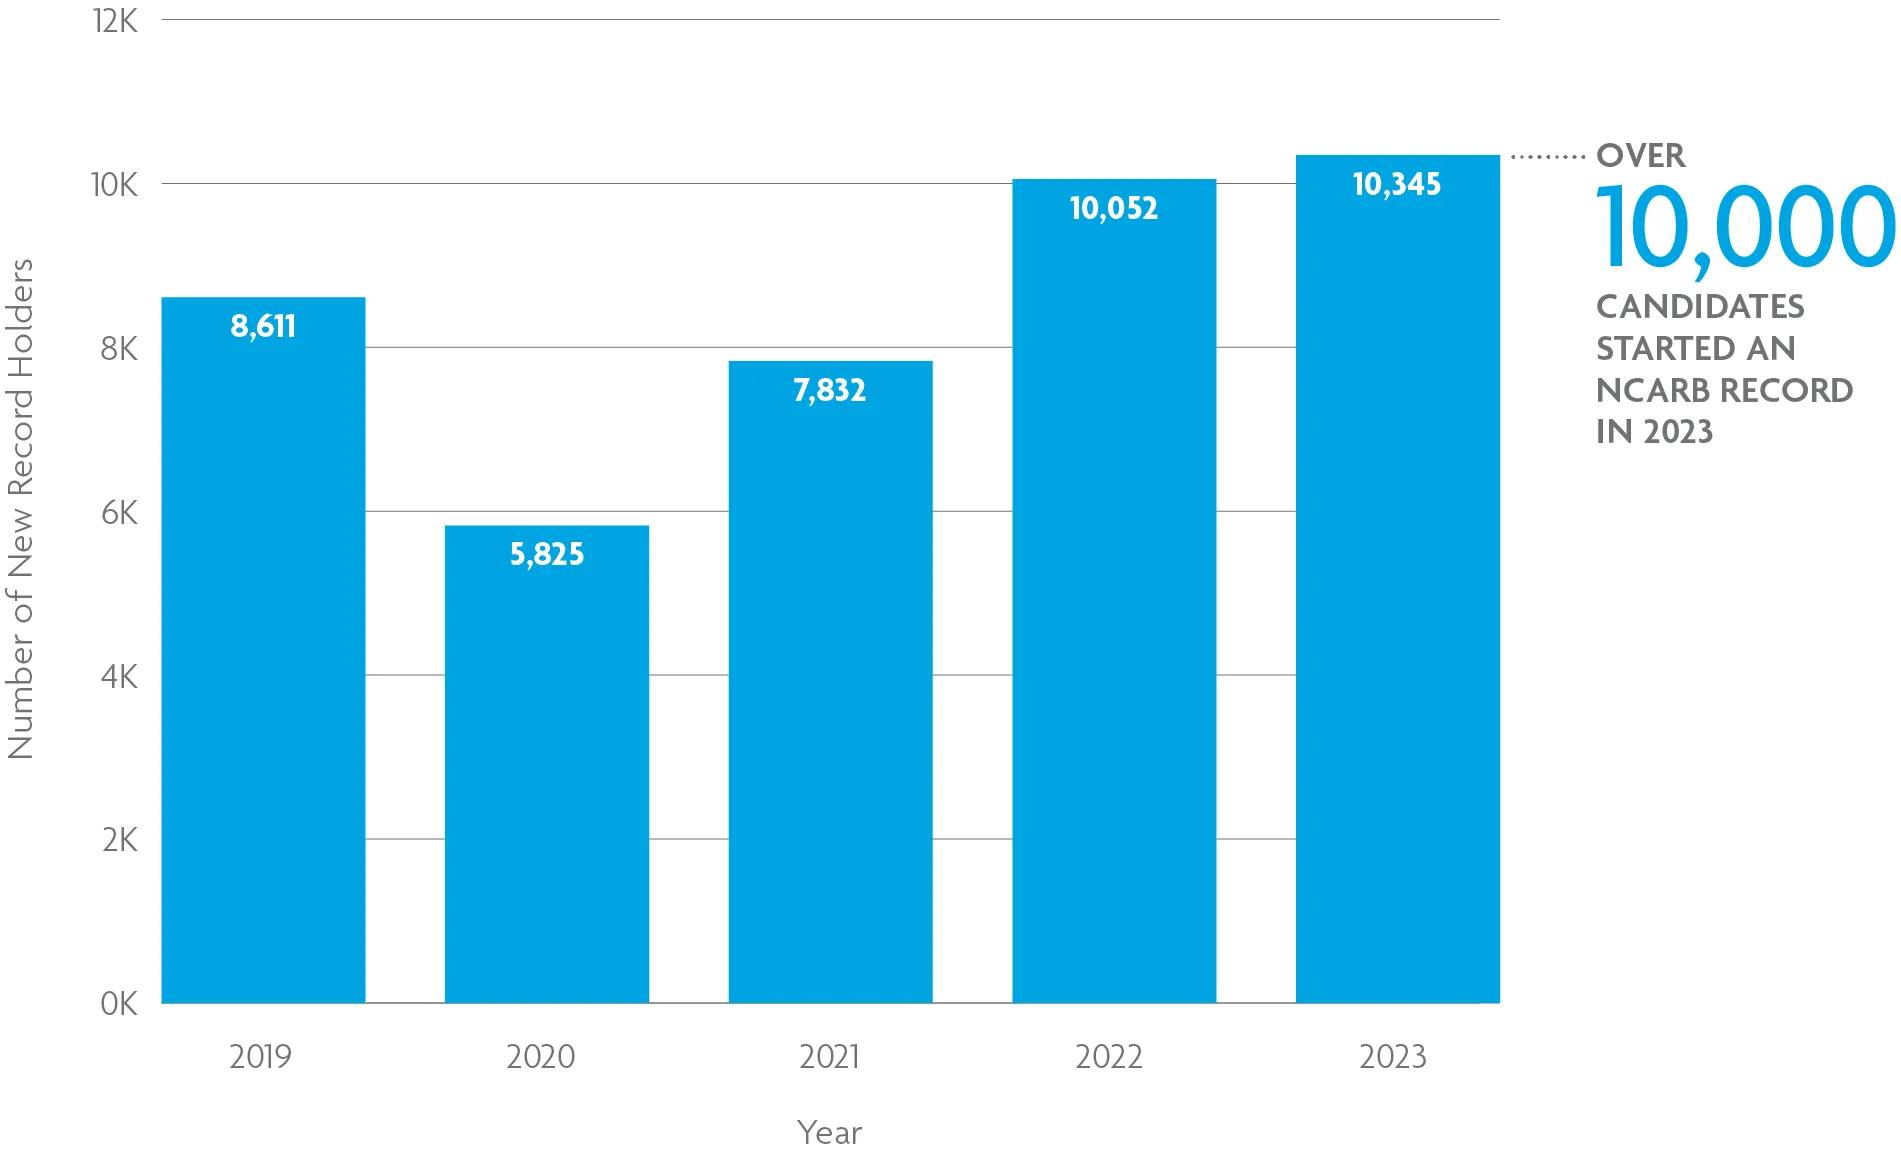 A bar chart shows that more than 10,000 candidates started an NCARB Record in 2023. For help with data accessibility, contact communications@ncarb.org.